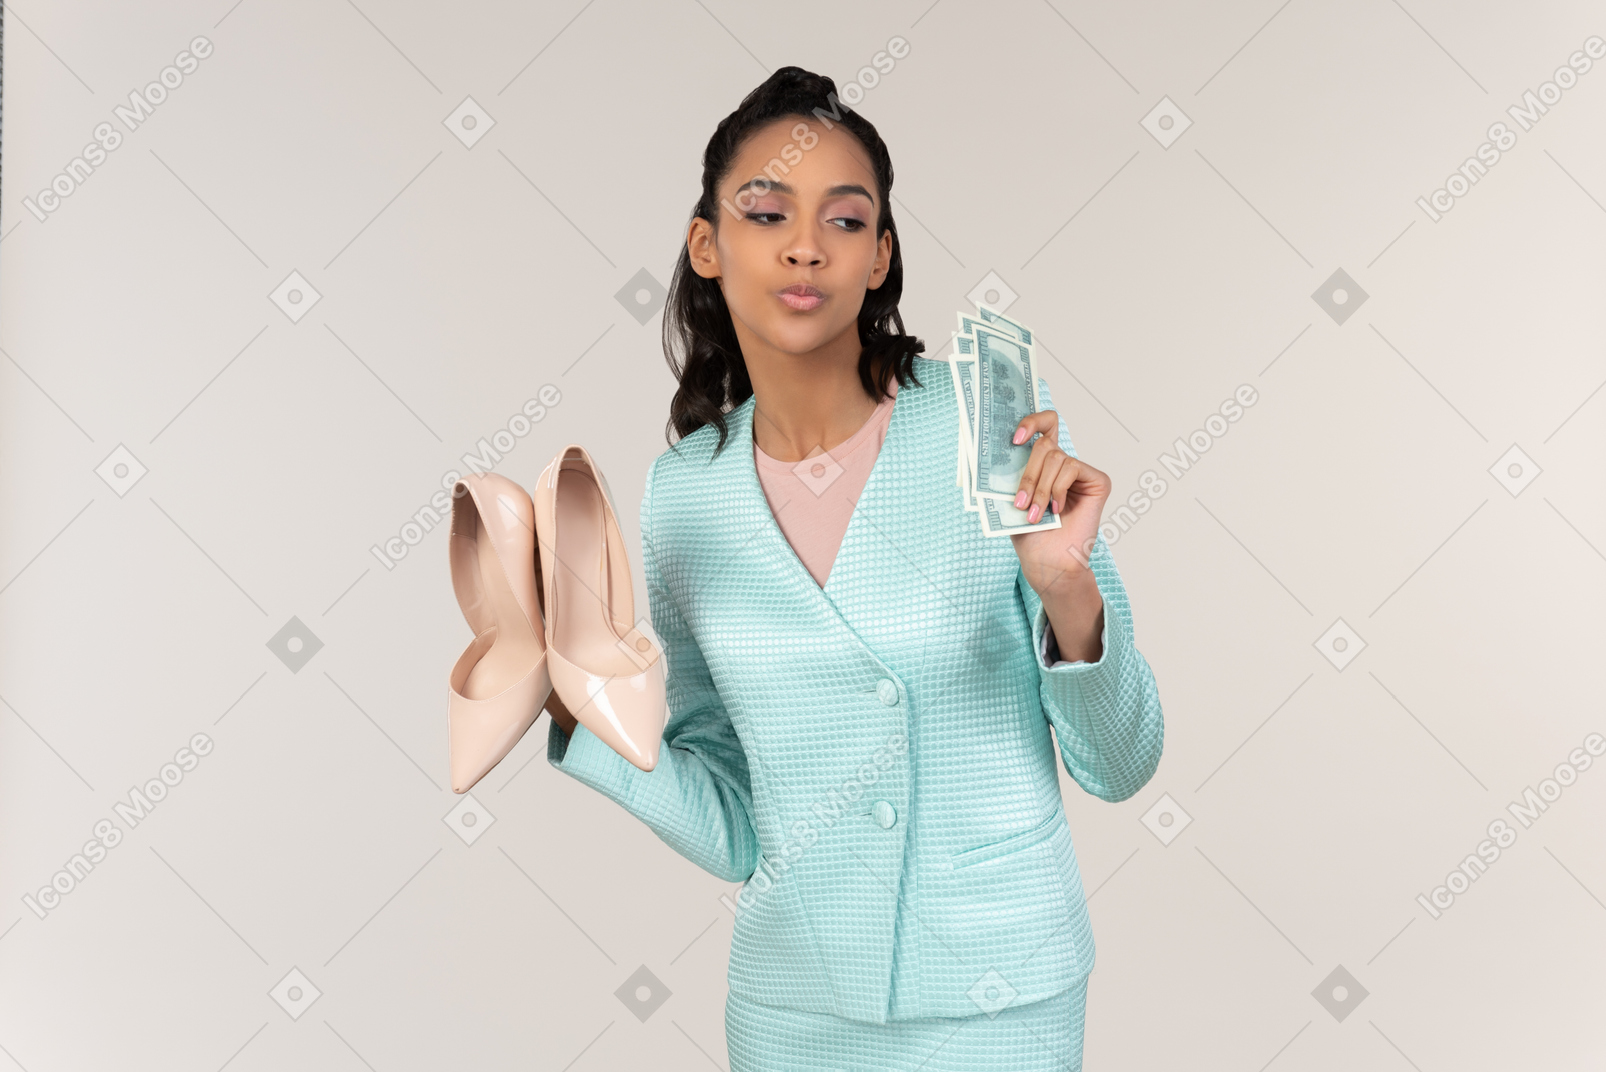 Catchy young afrowoman holding money bills and beige heels